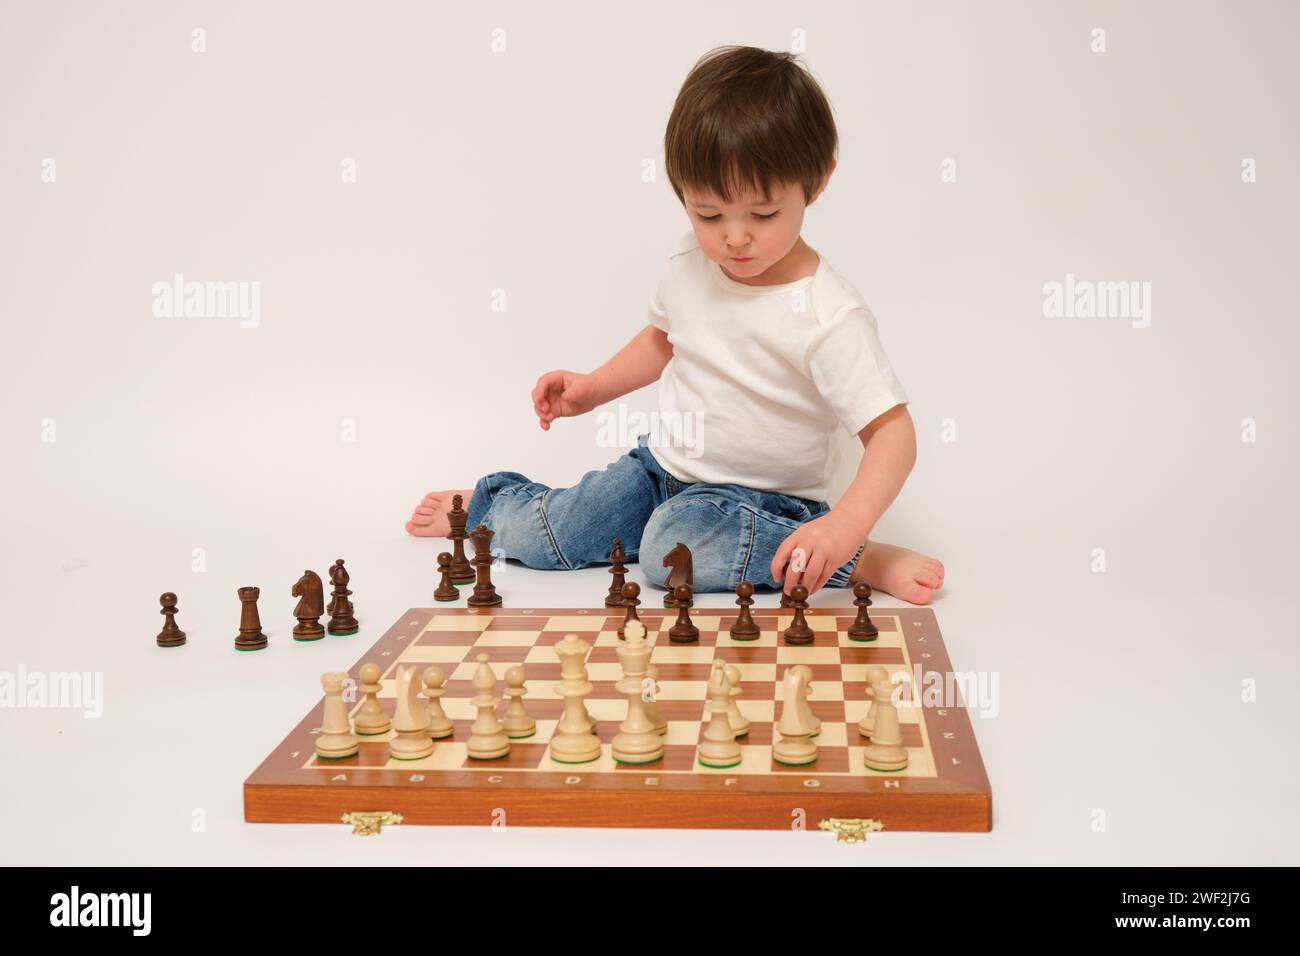 A child is playing chess, studio white background. Baby with chess pieces on a chessboard Stock Photo